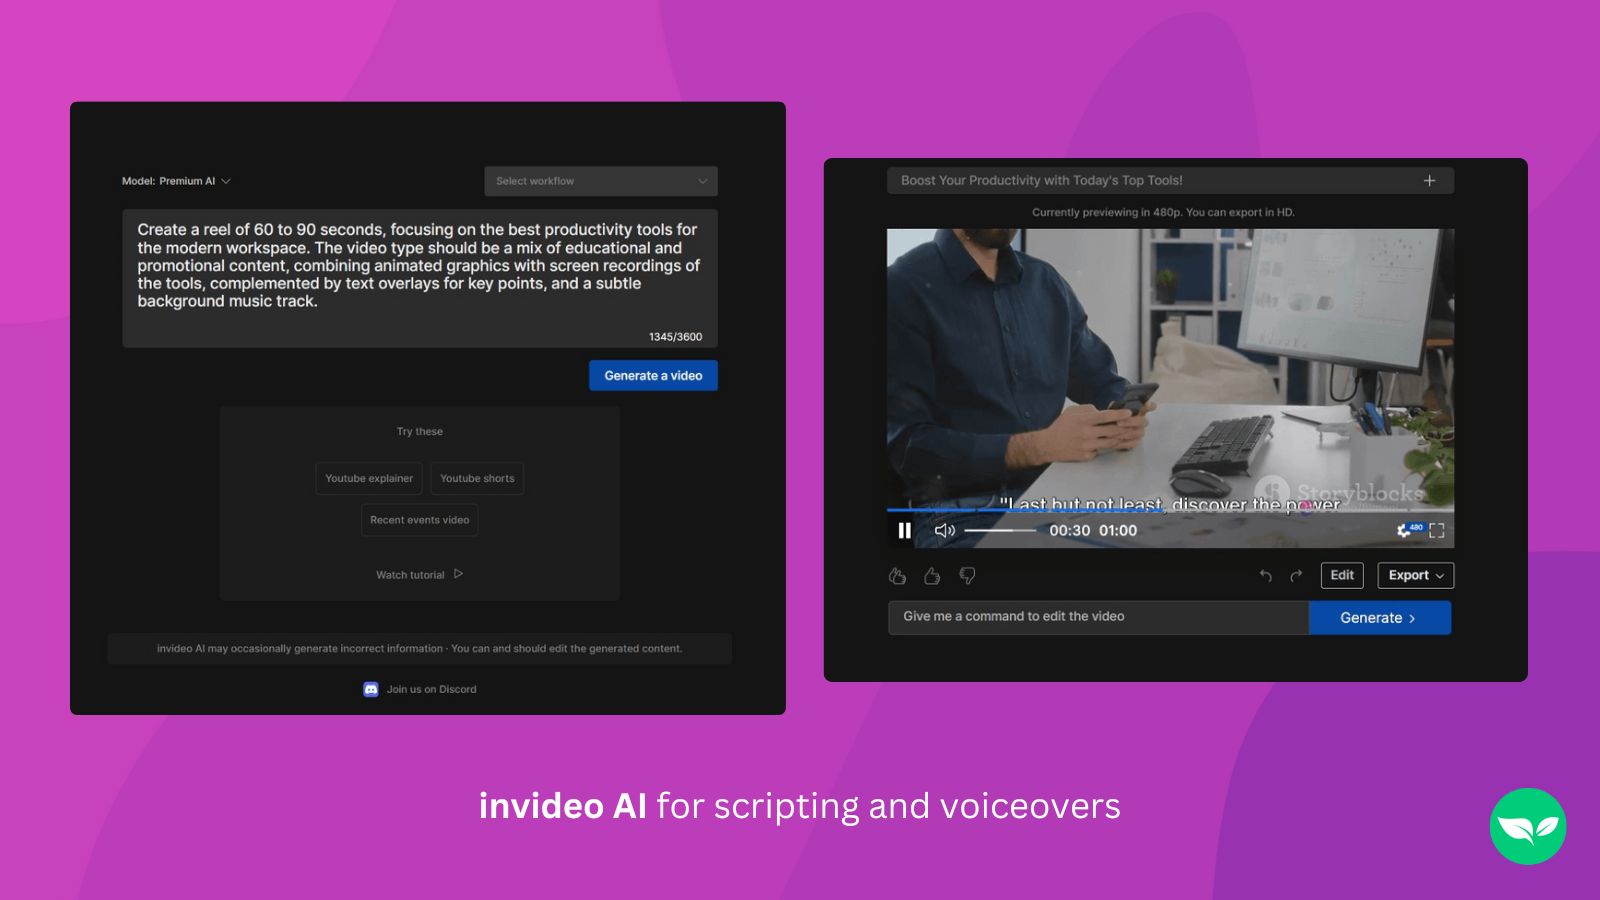 A screenshot showing invideo AI being used to create a YouTube video